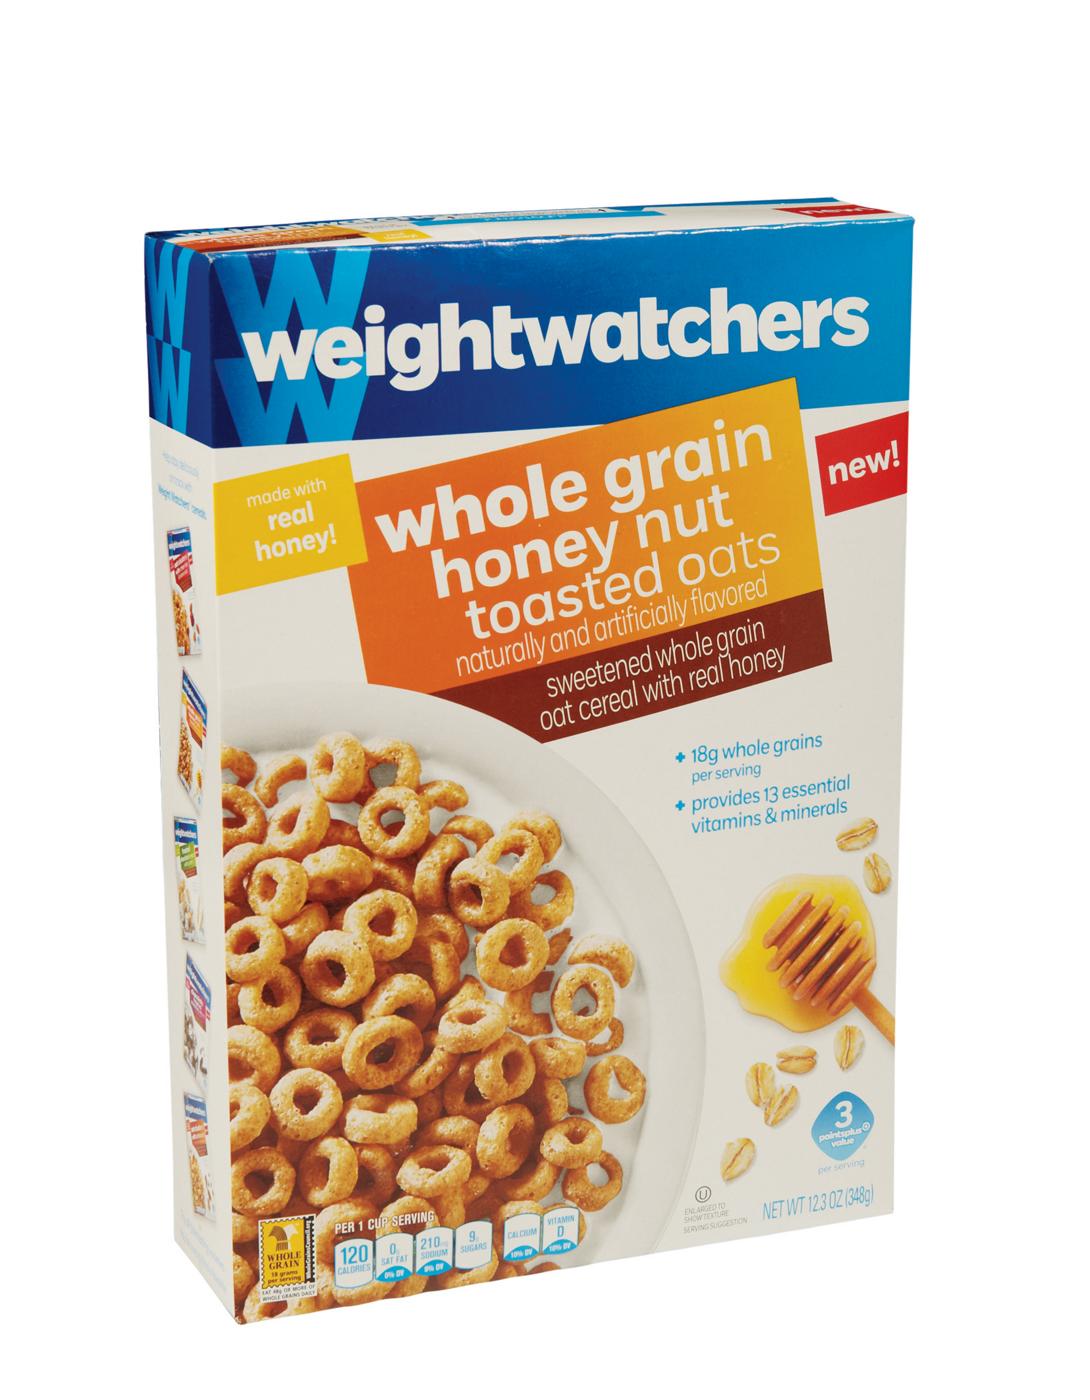 Weight Watchers Honey Nut Toasted Oats; image 1 of 2